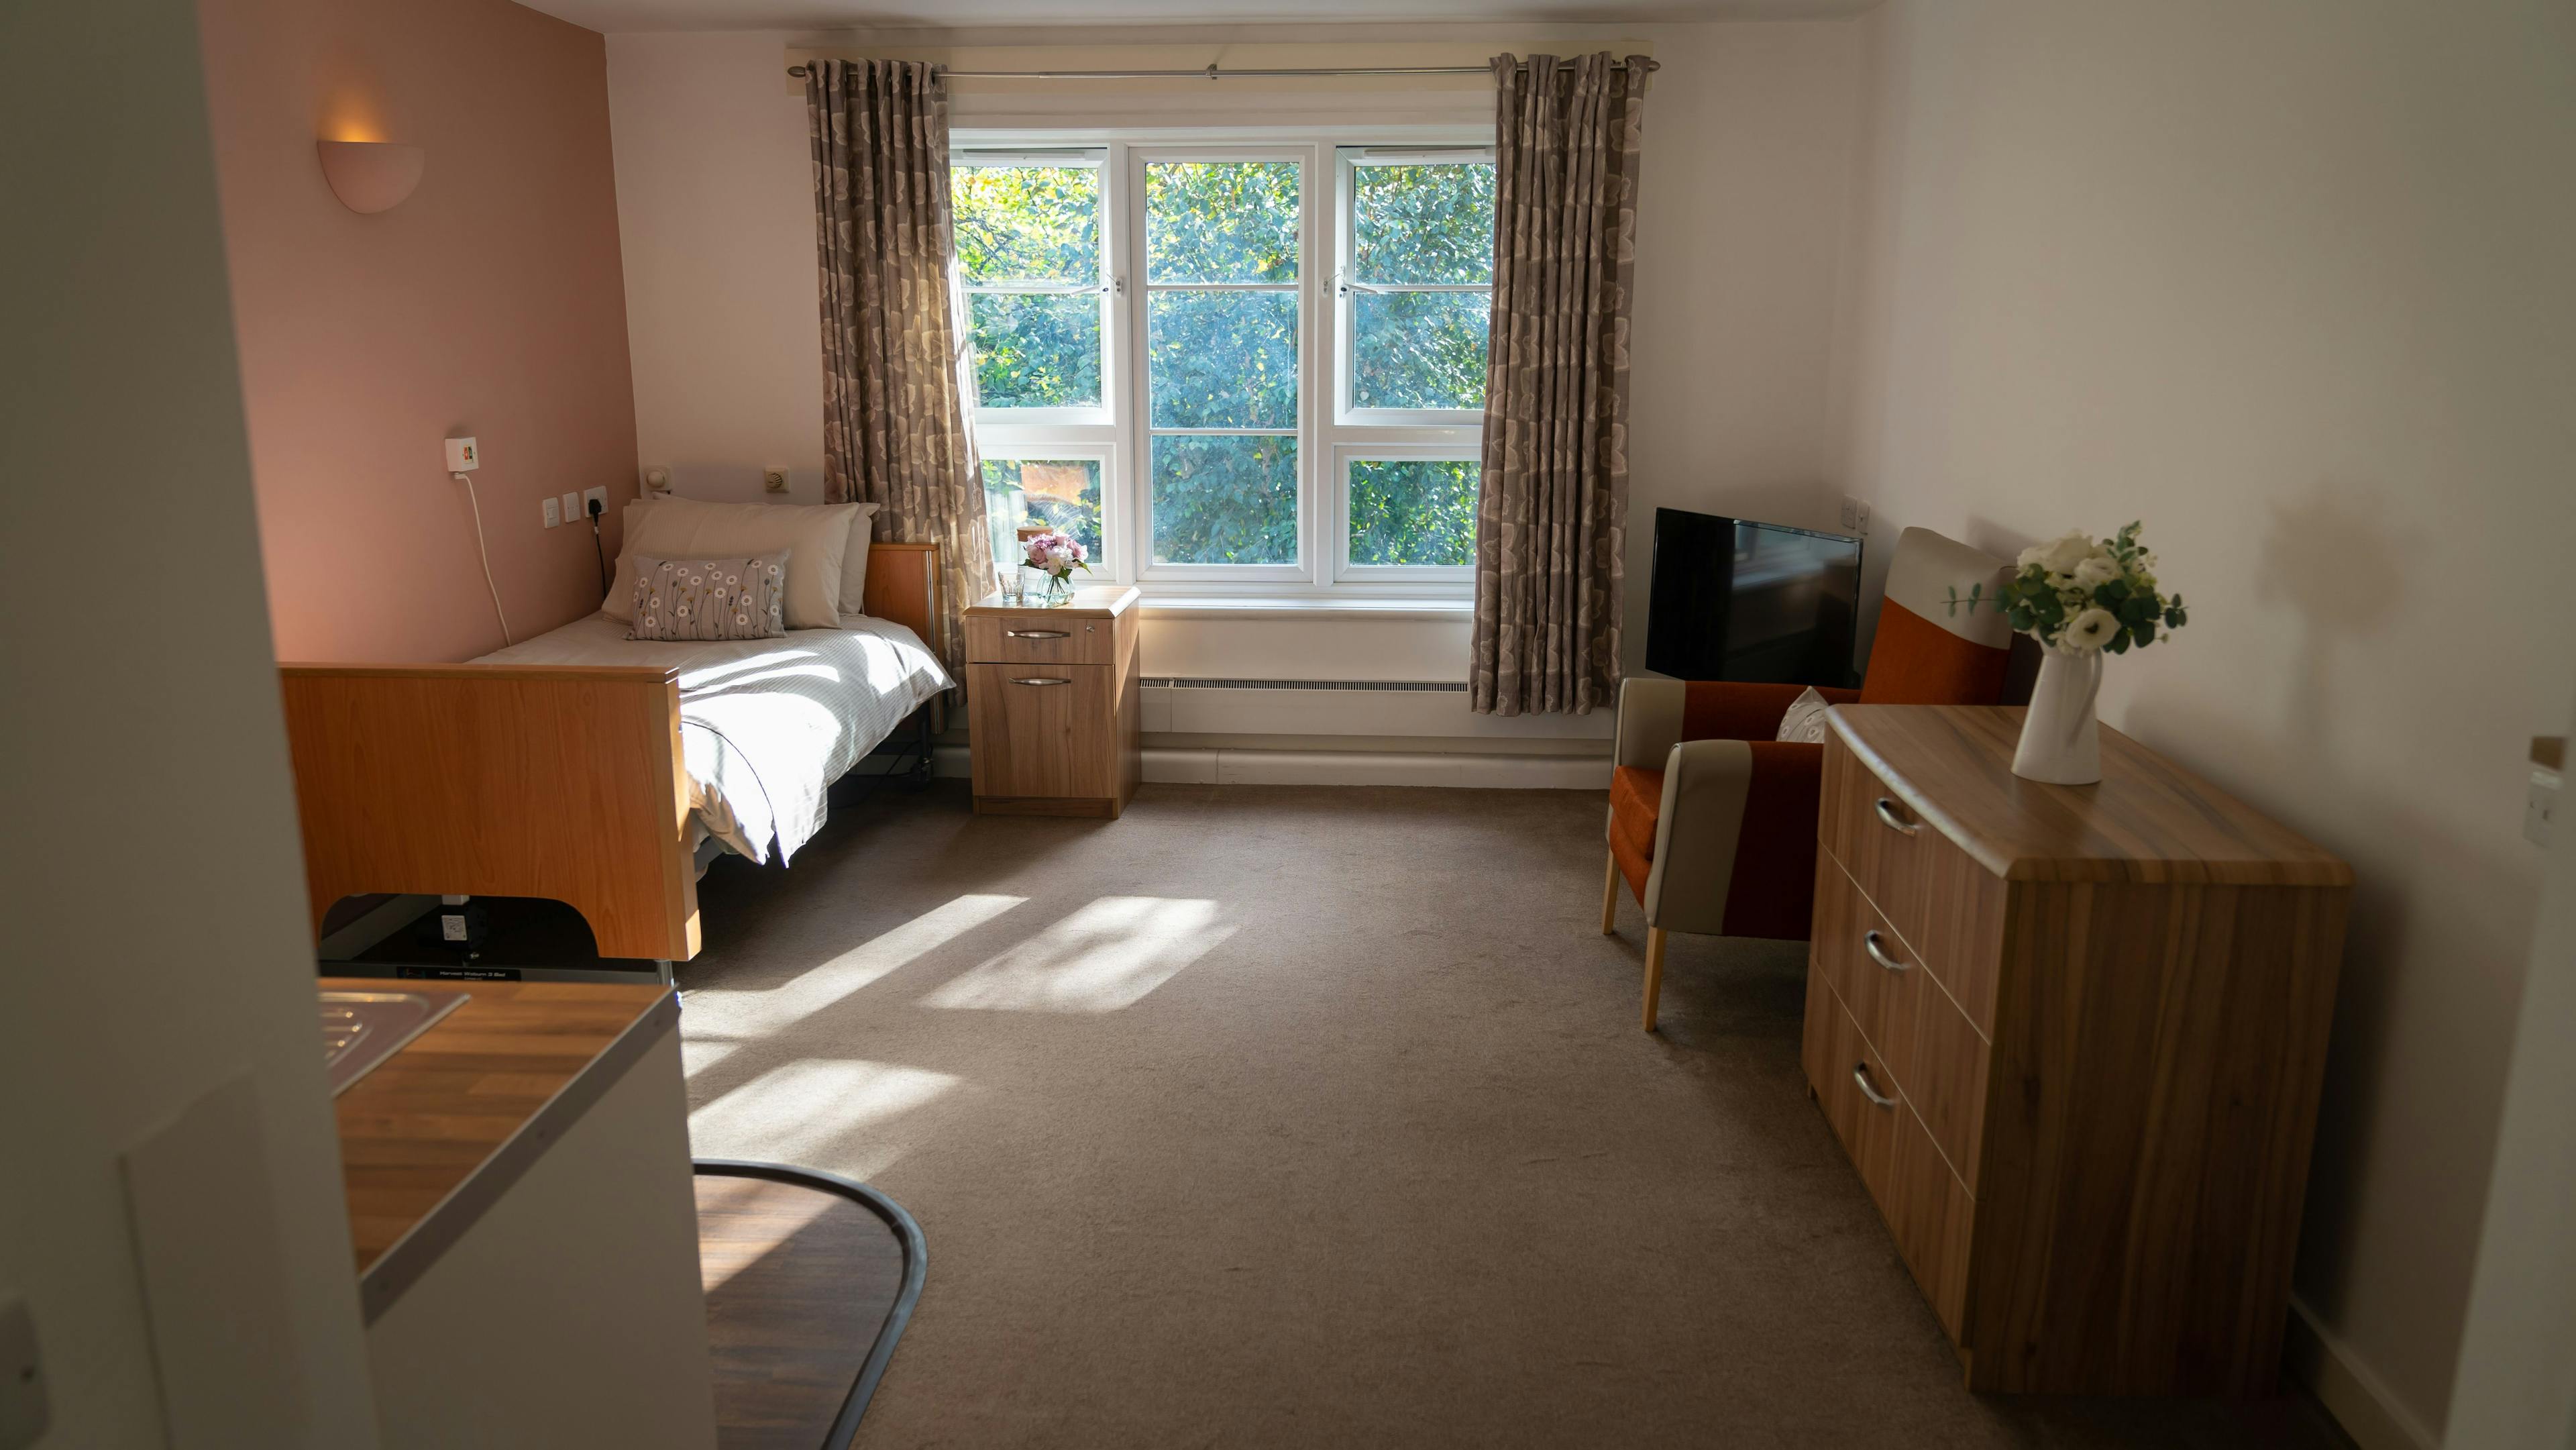 Bedroom at Ashna House Care Home in Streatham, London